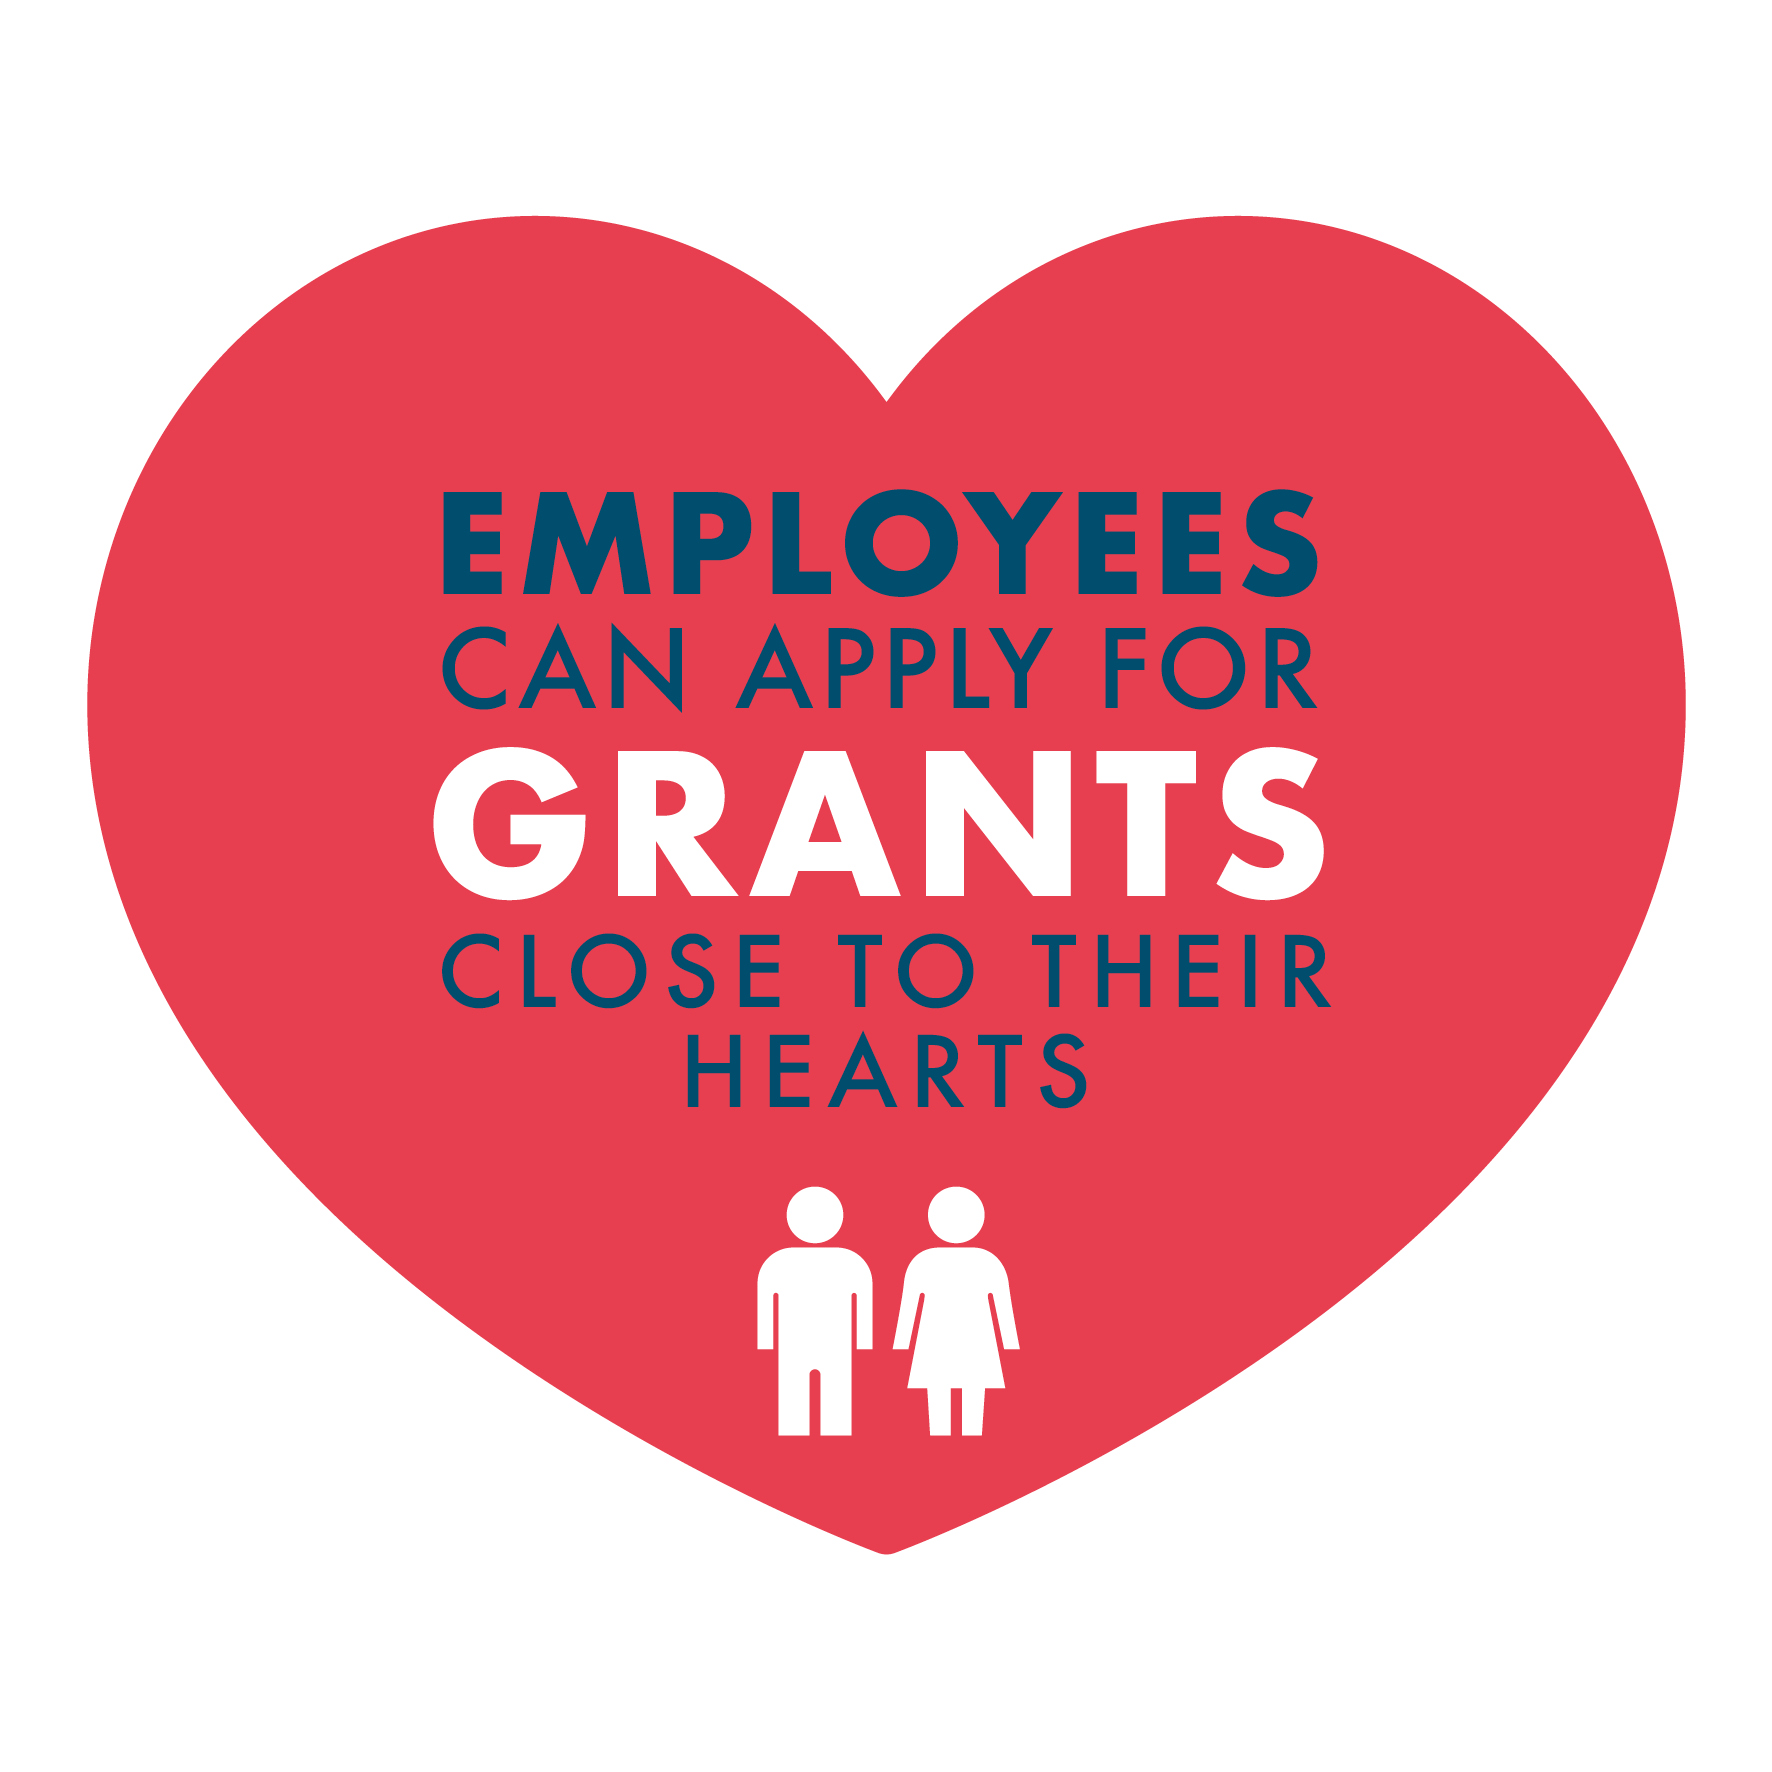 Employees can apply for grants close to their hearts